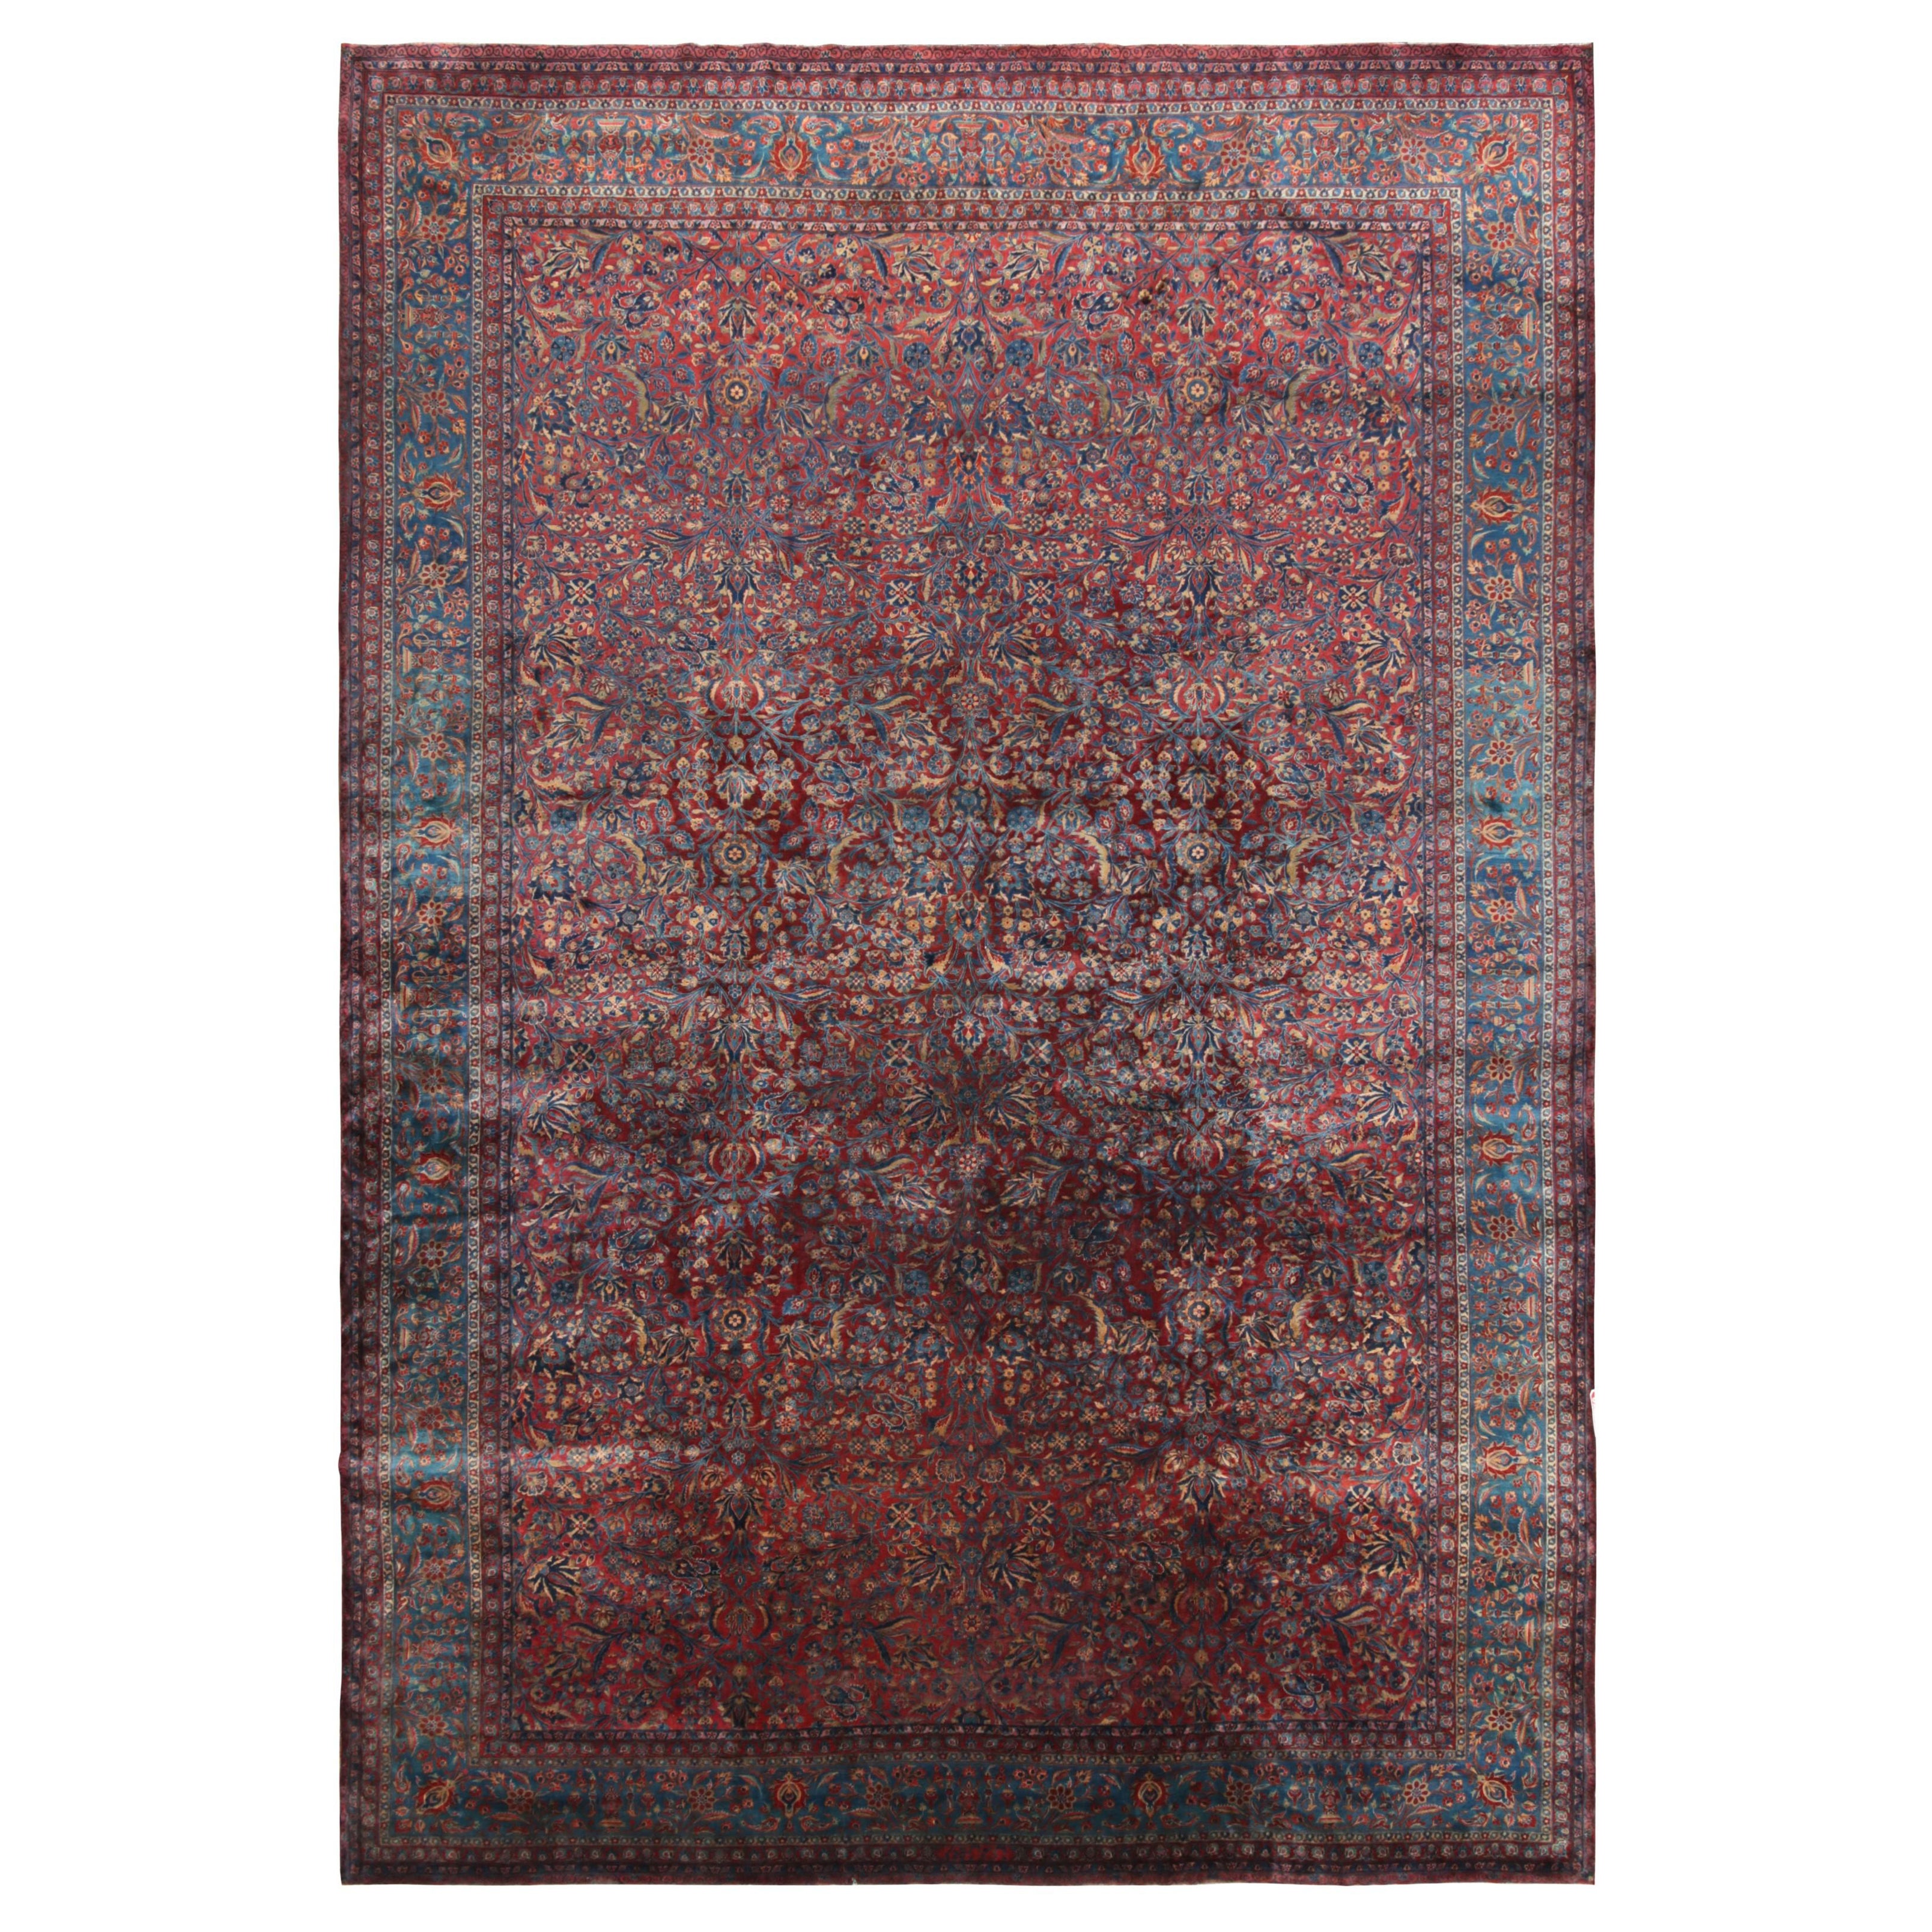 Antique Persian Kashan Rug with Red-Blue Floral Patterns by Rug & Kilim